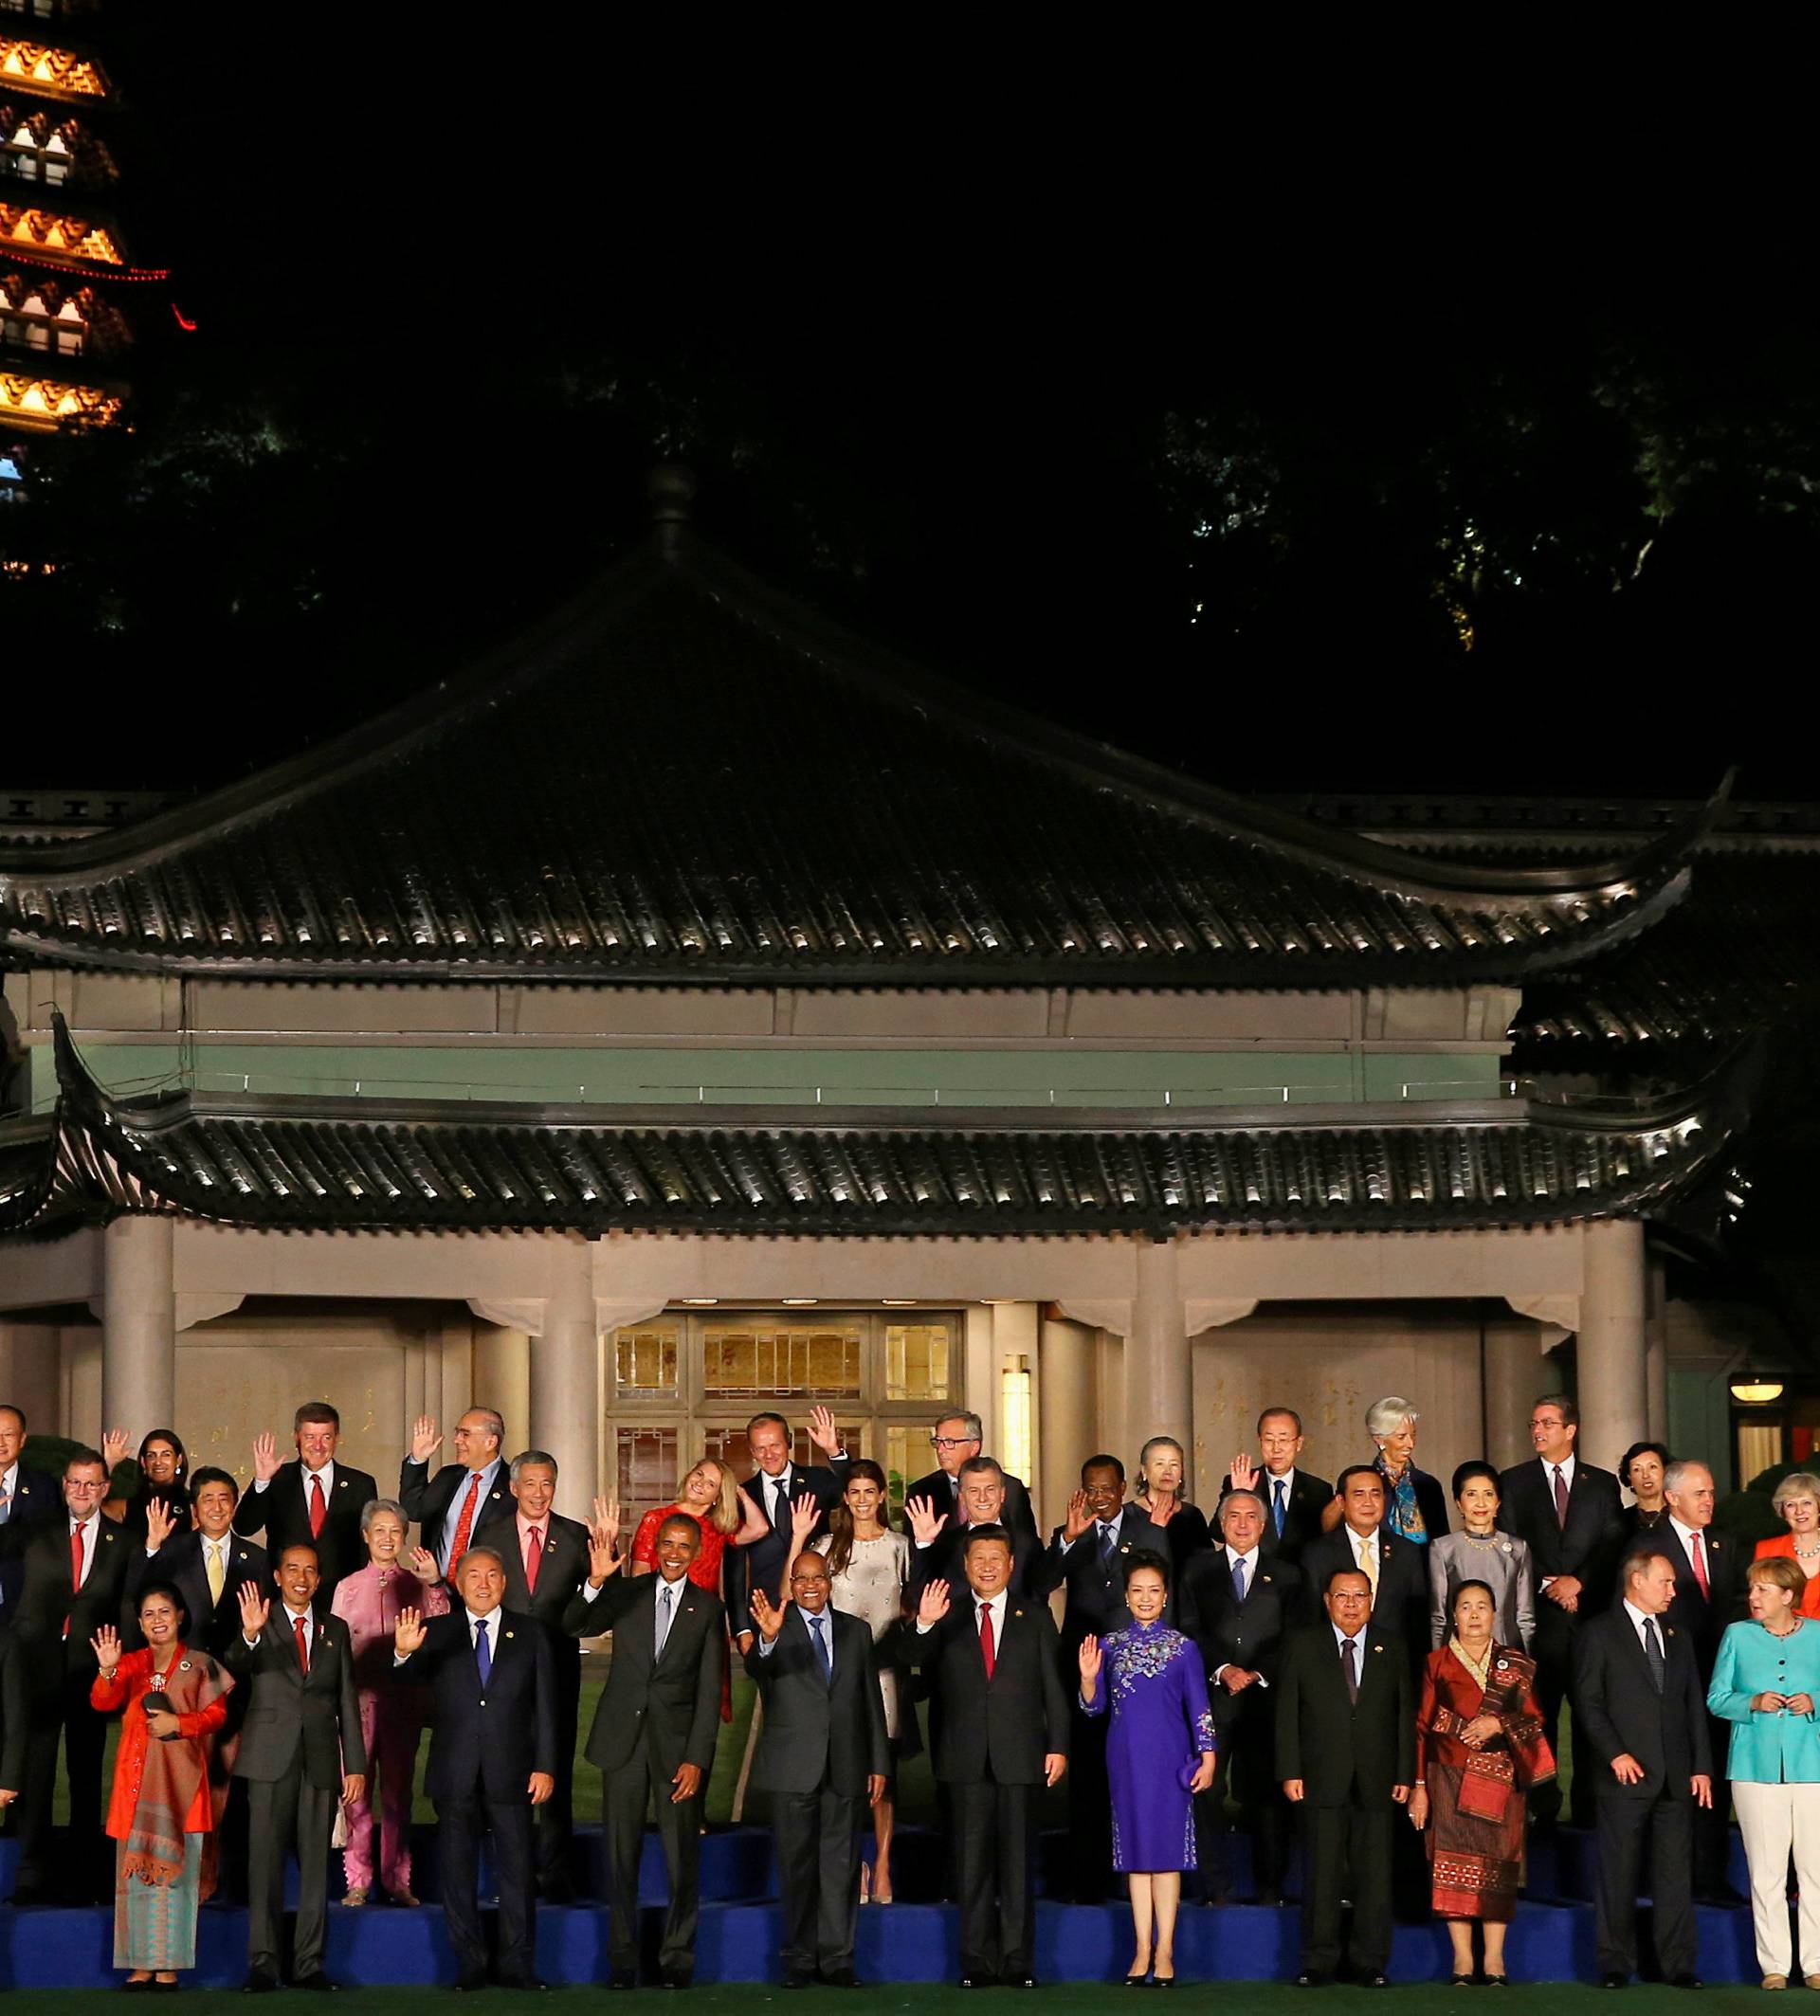 Leaders pose for a family picture during the G20 Summit in Hangzhou